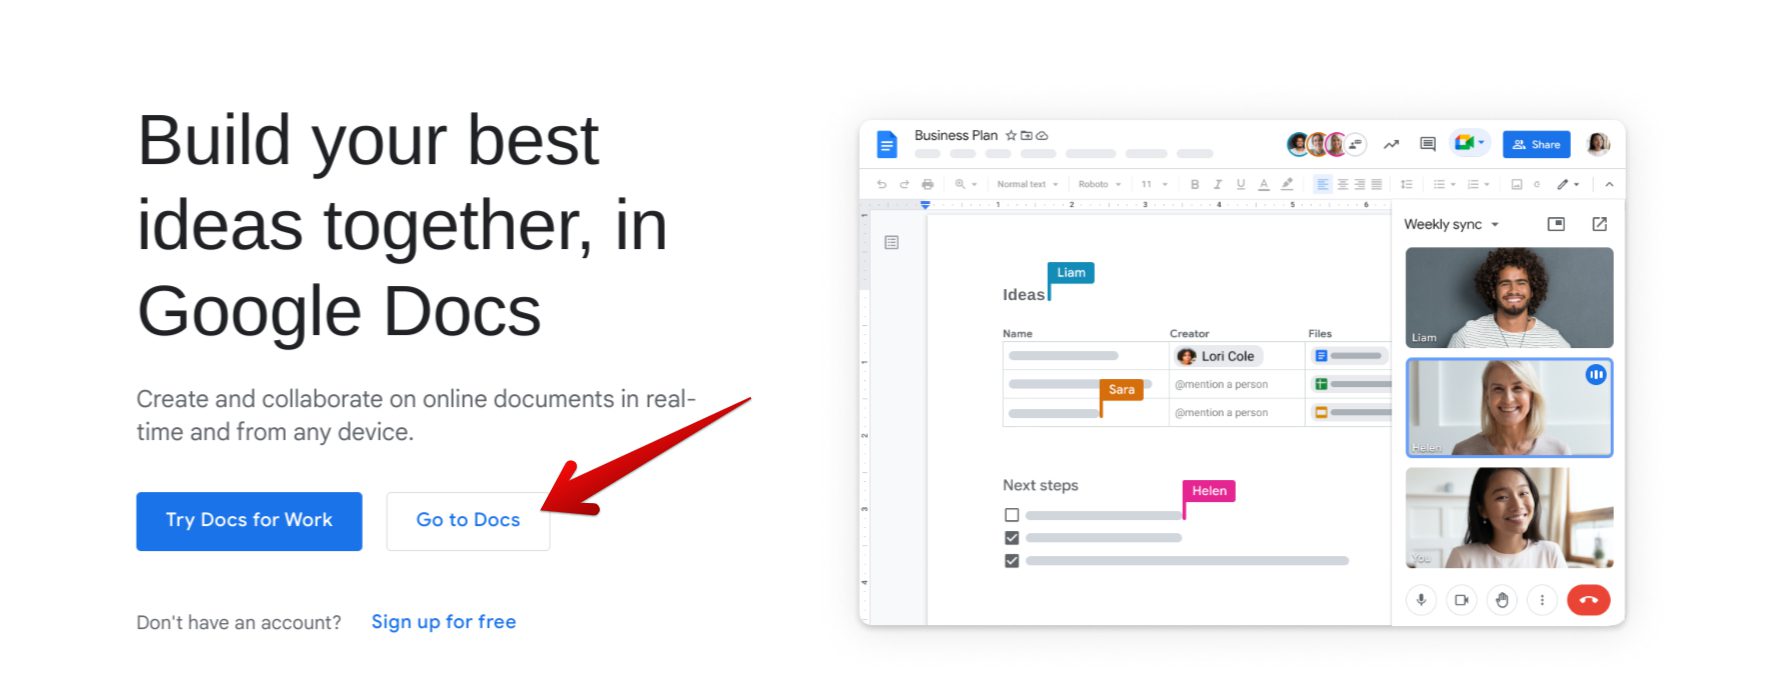 Getting started with Google Docs